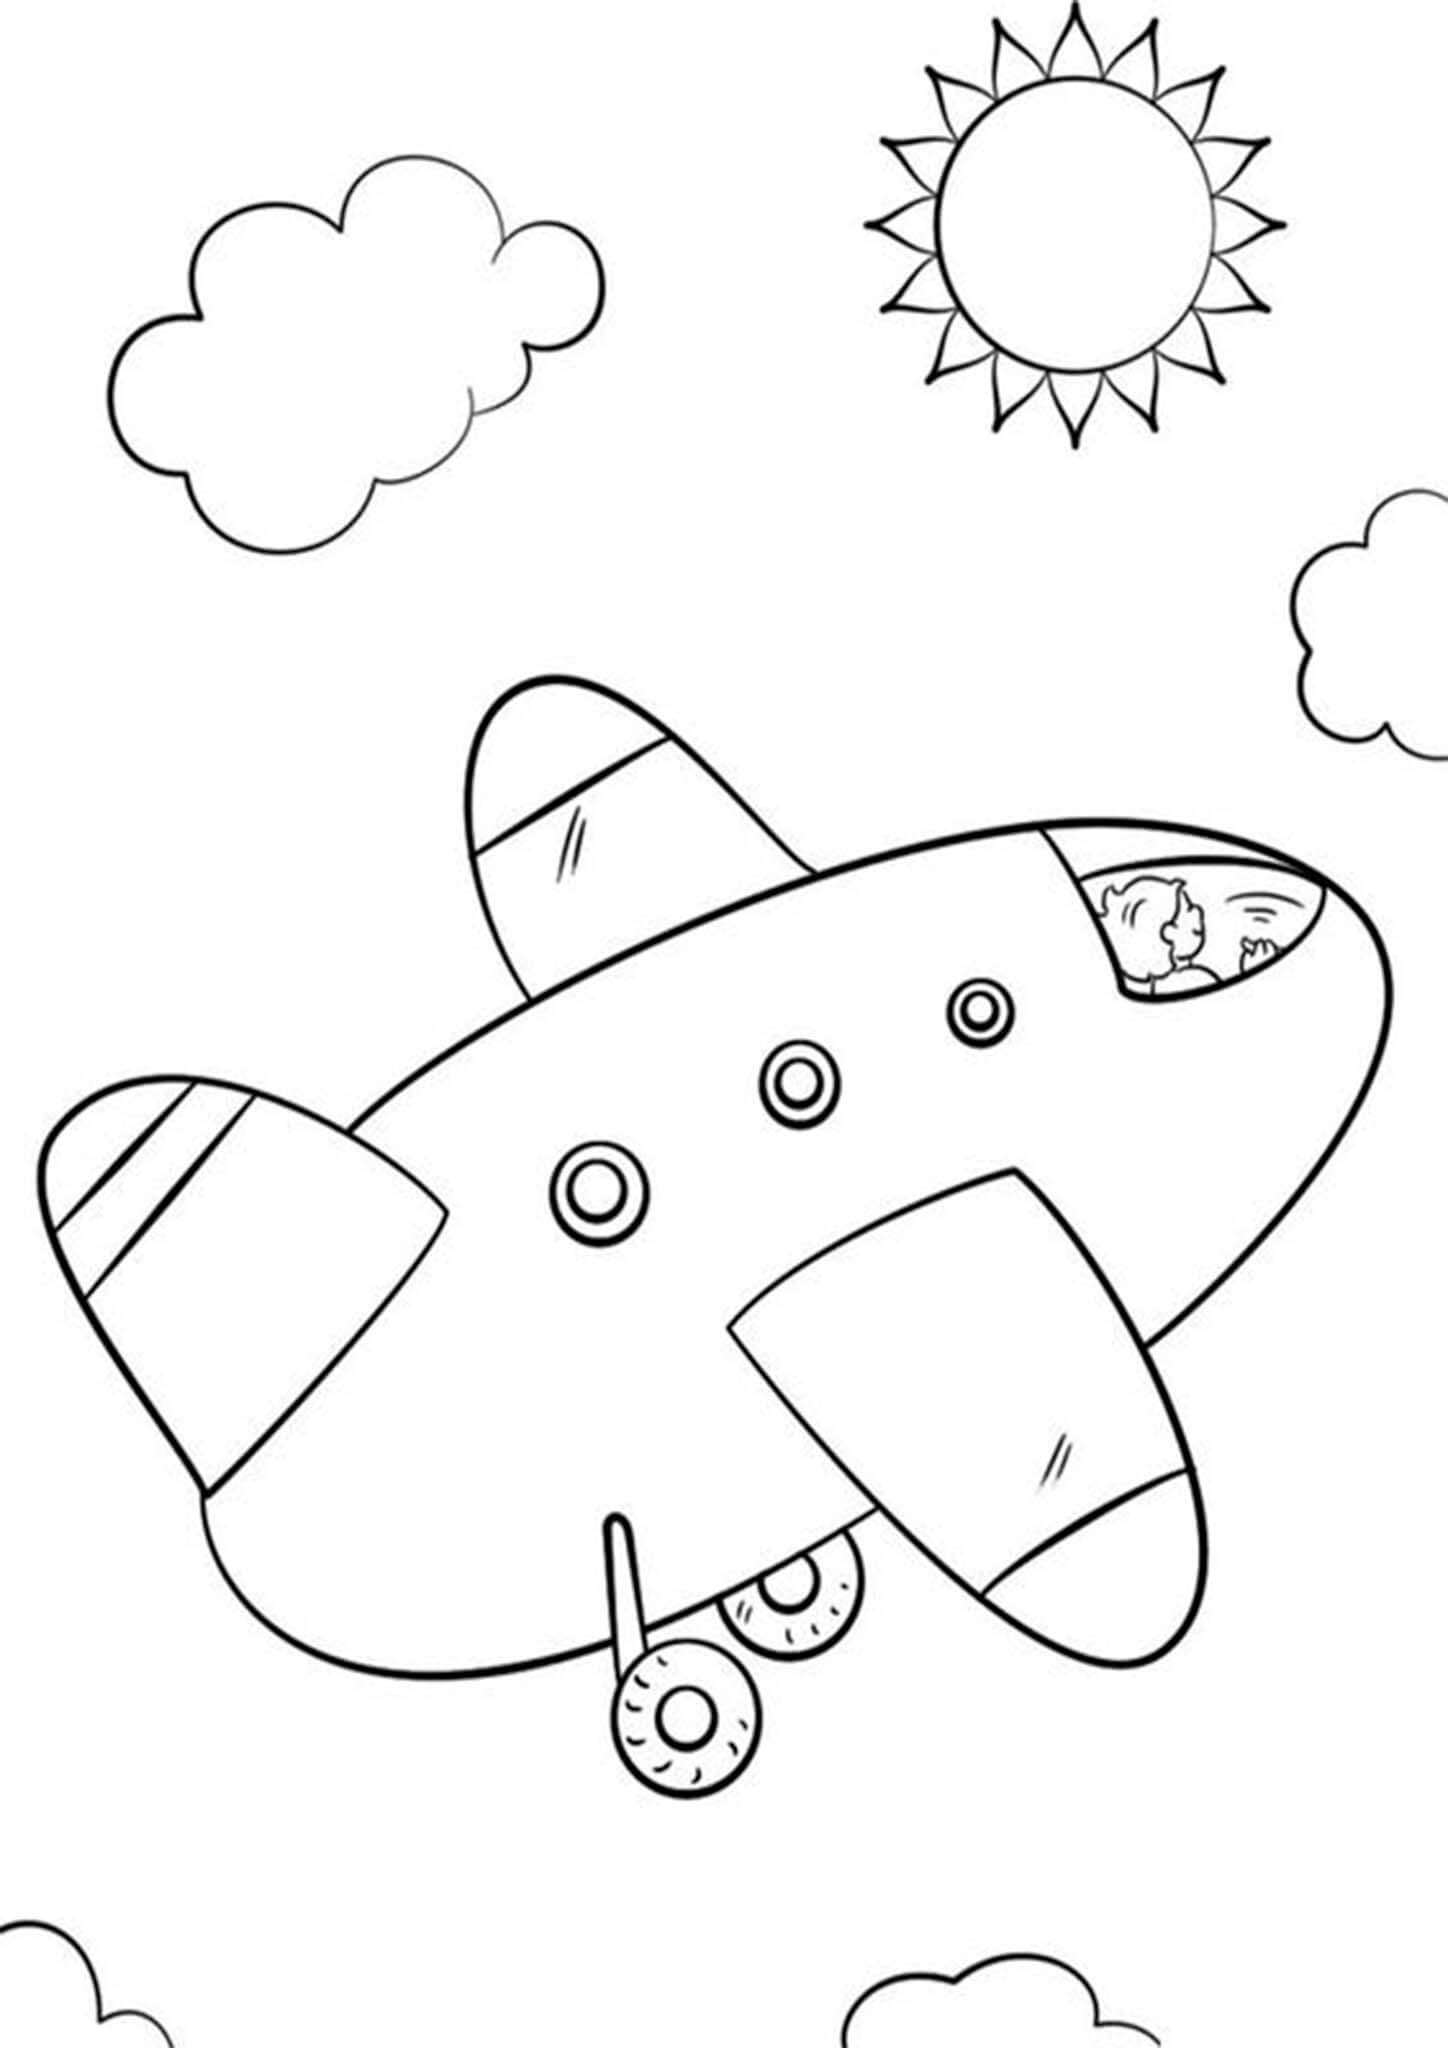 Download Free & Easy To Print Airplane Coloring Pages - Tulamama